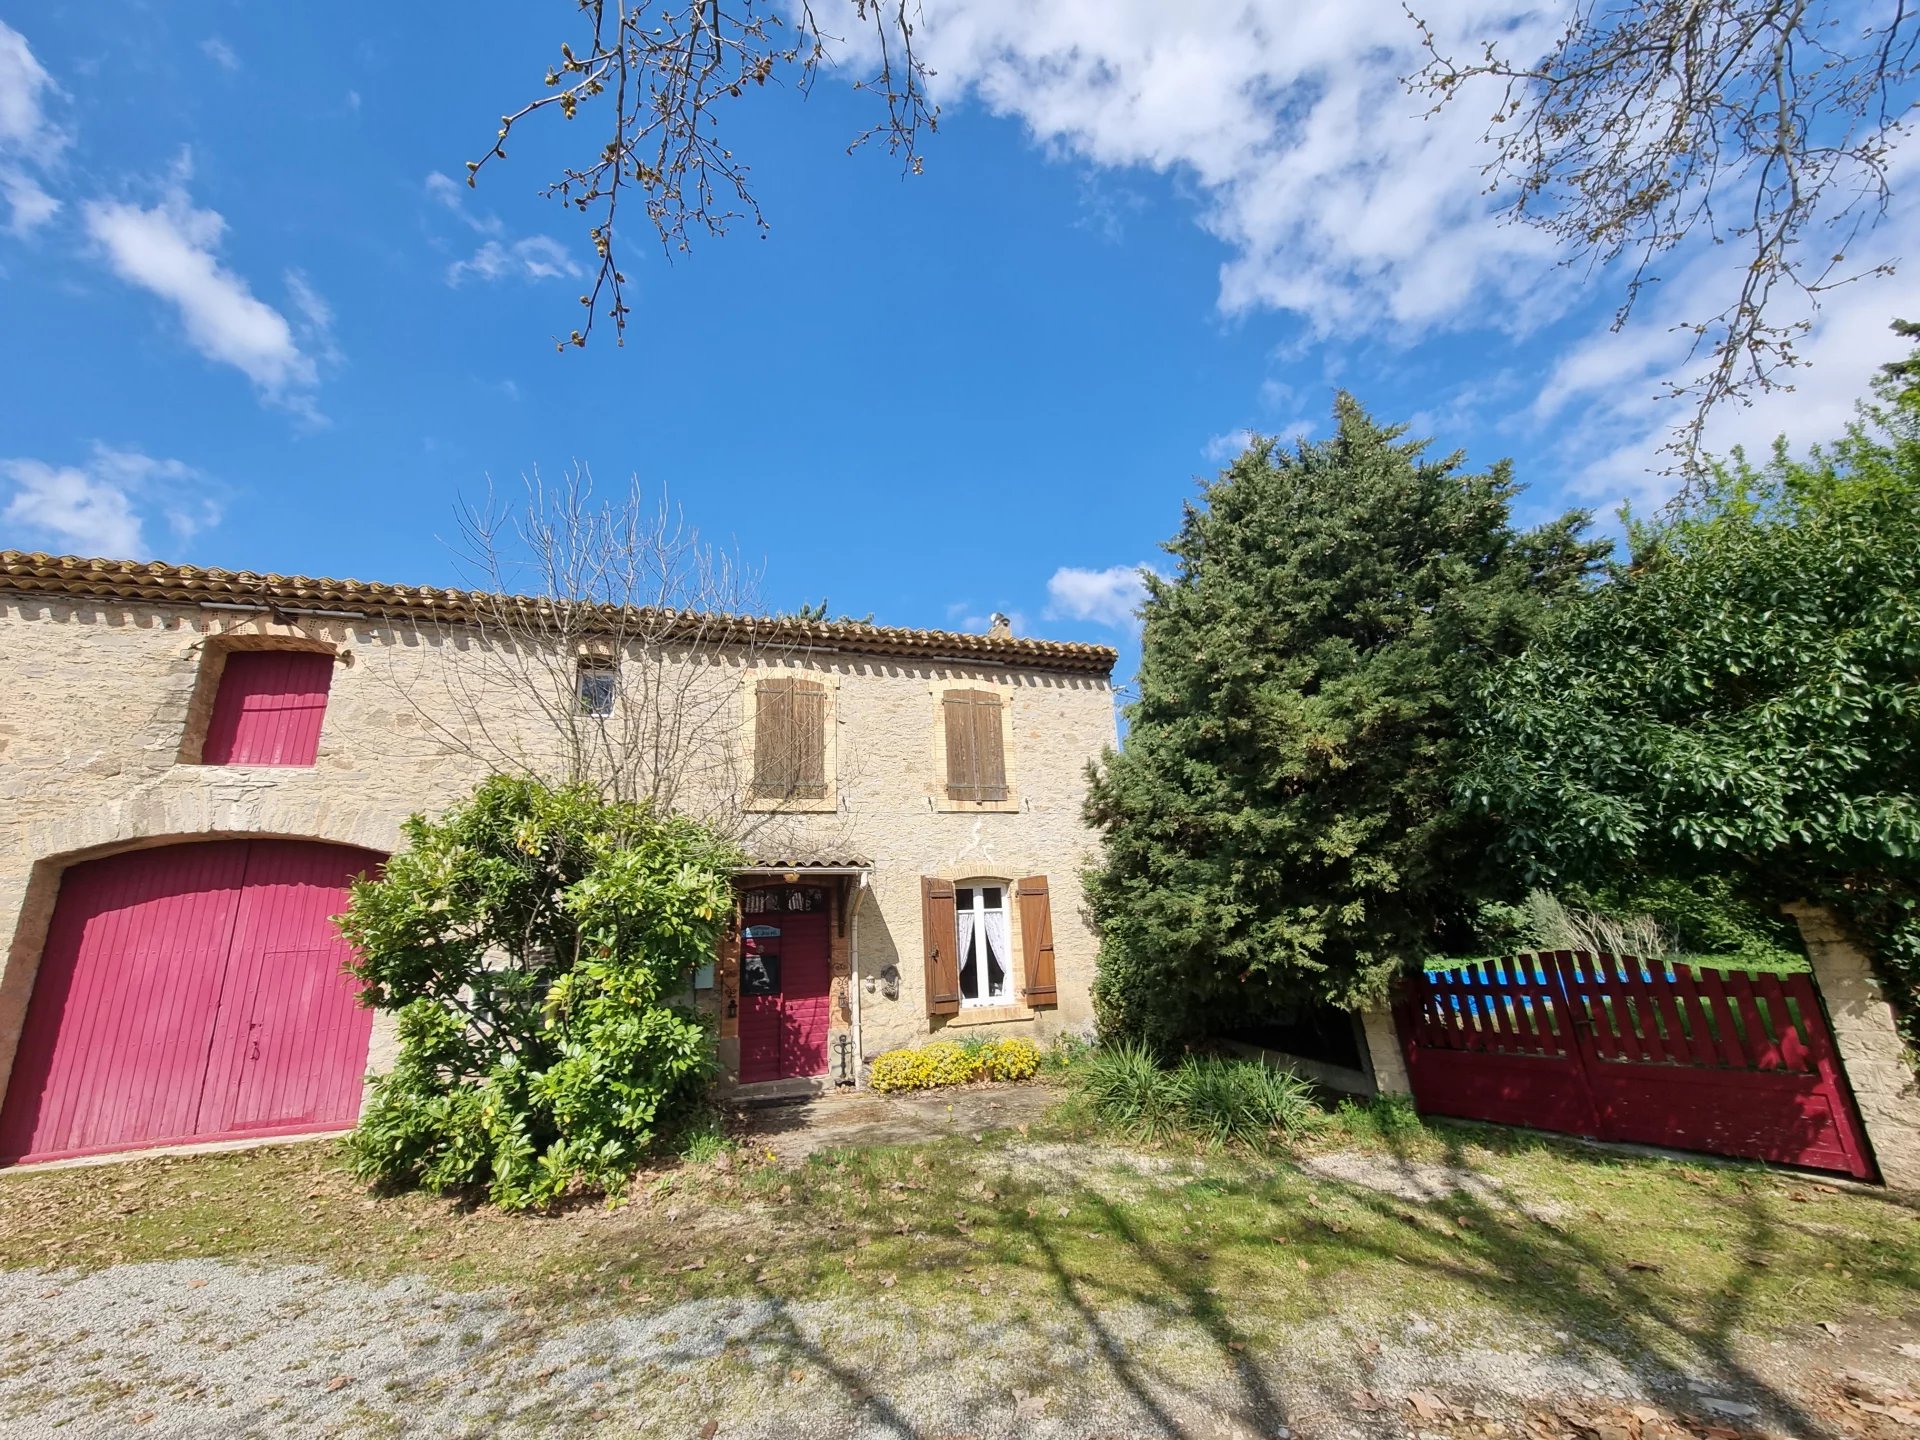 Charming 5 bedroom, 4 bathroom, manor house with pool, surrounded by vineyards